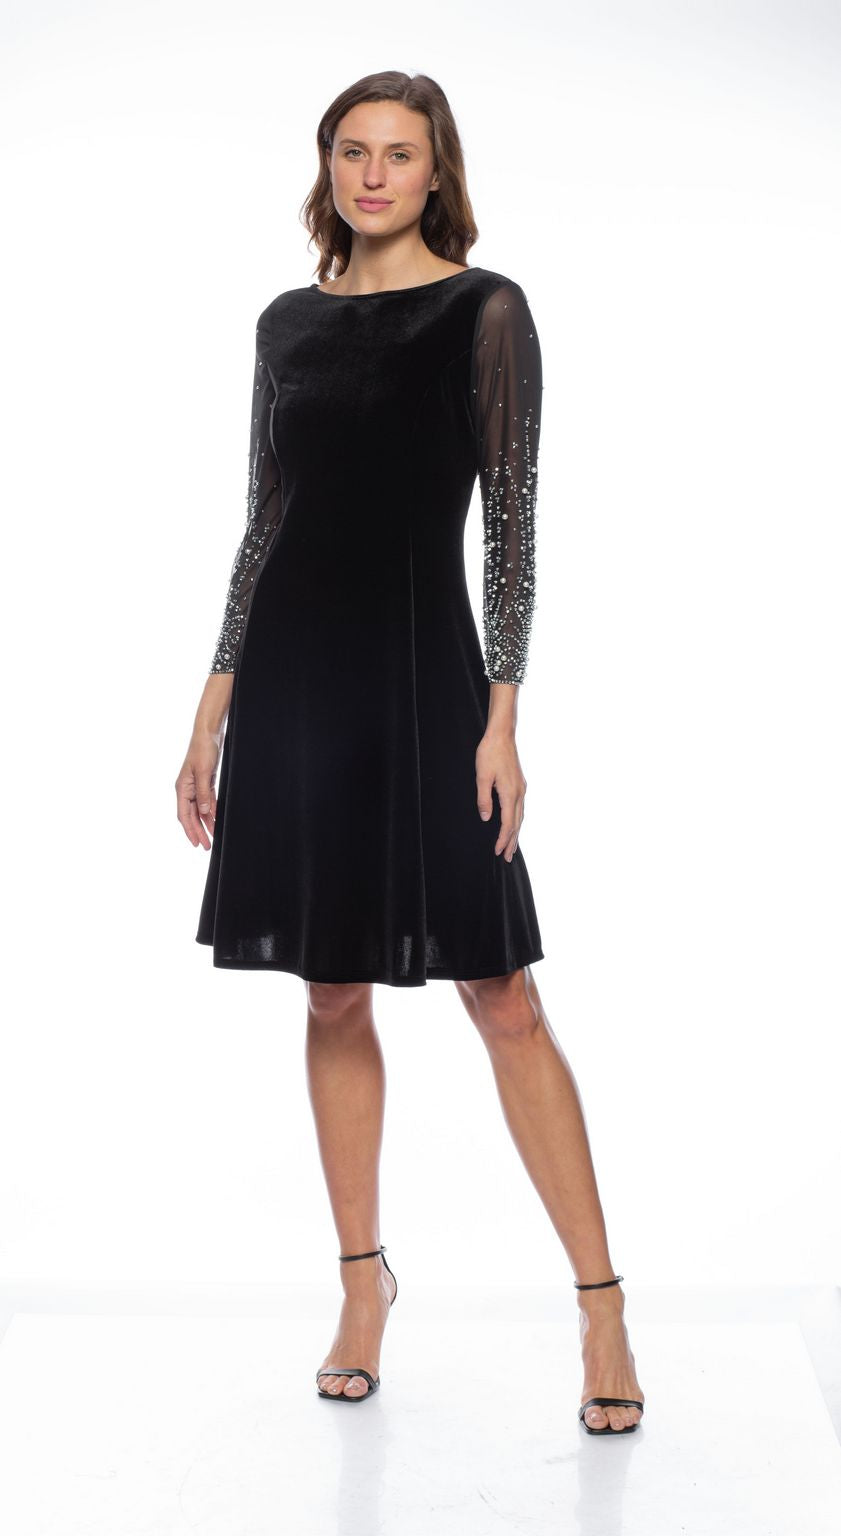 Laundry by Shelli Segal Womens Embellished Knee Cocktail and Party Dress Black 4